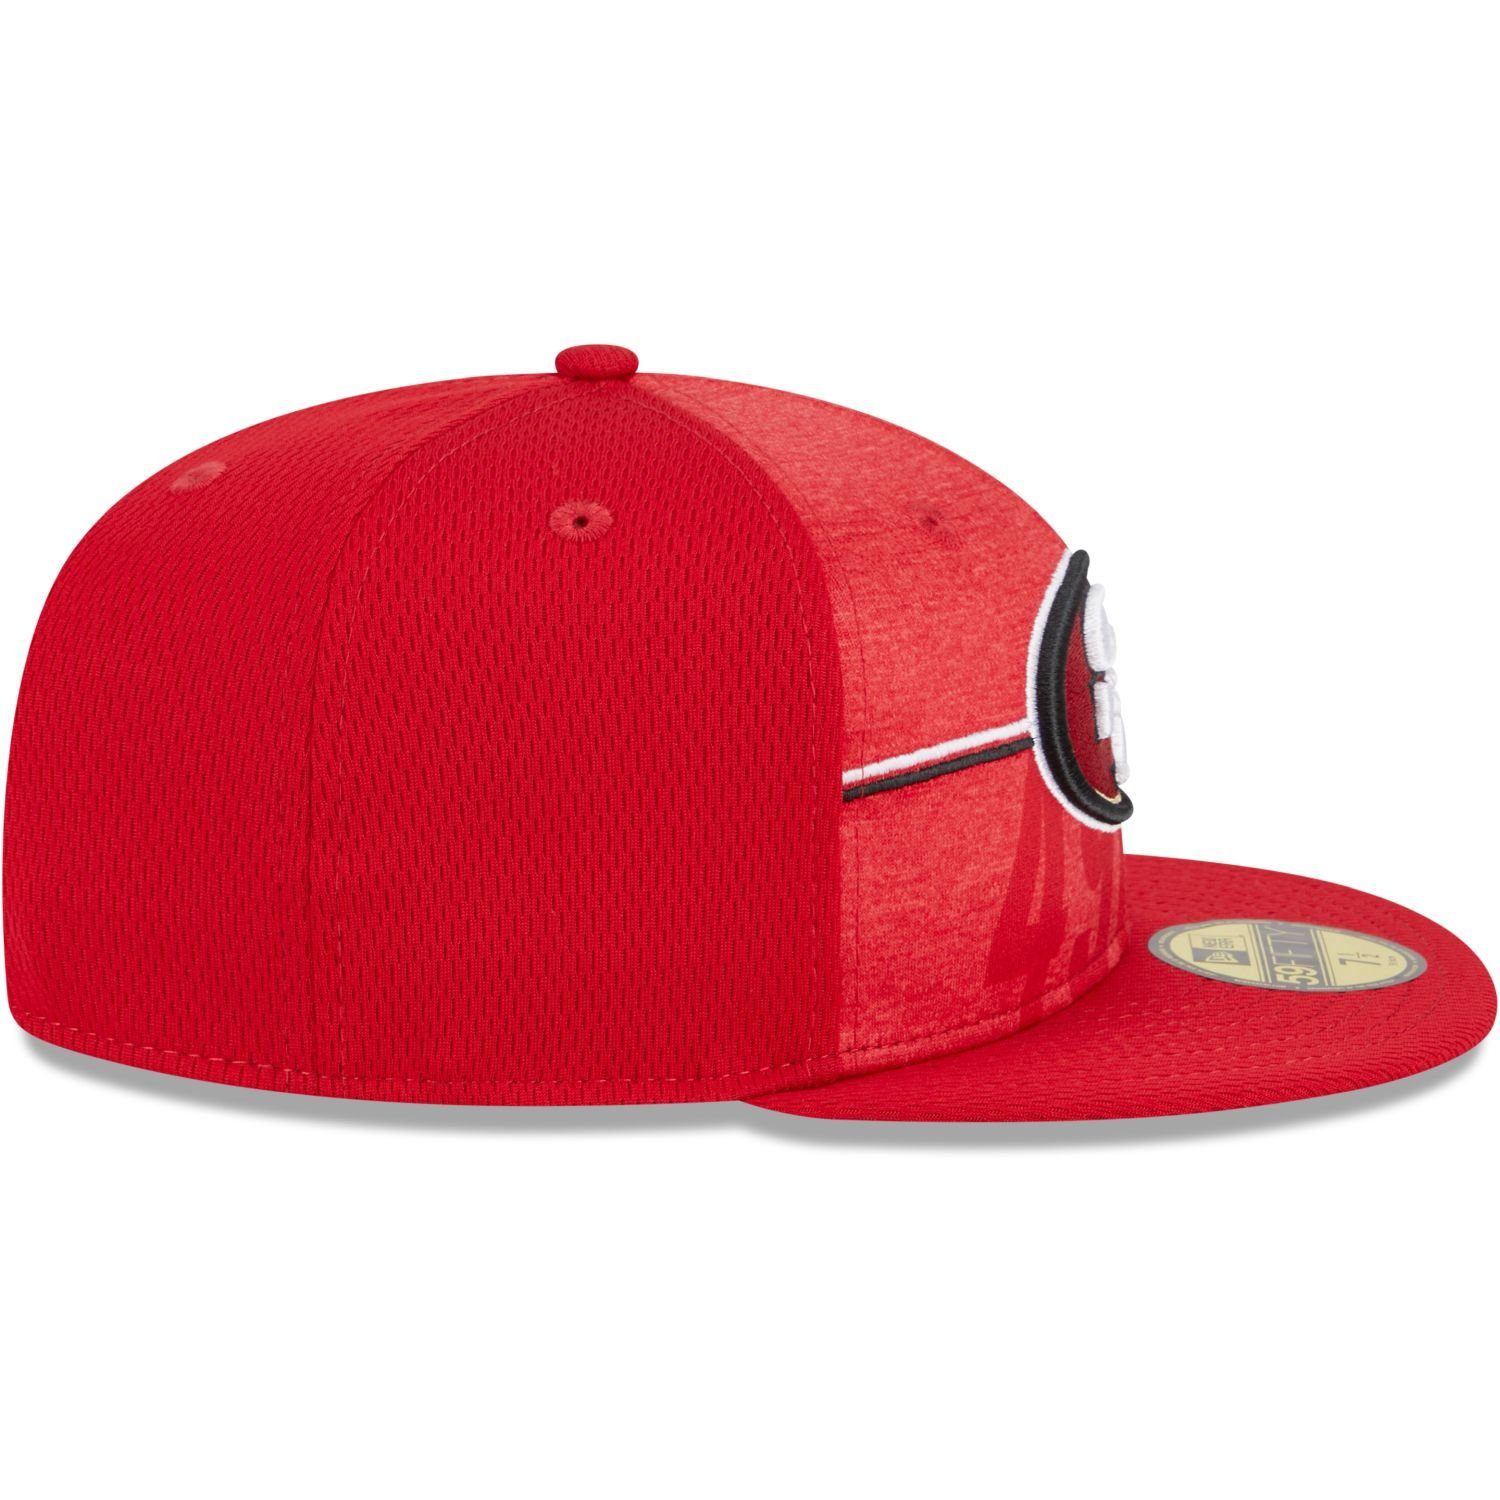 New Era Fitted Cap 59Fifty TRAINING Francisco San 49ers NFL